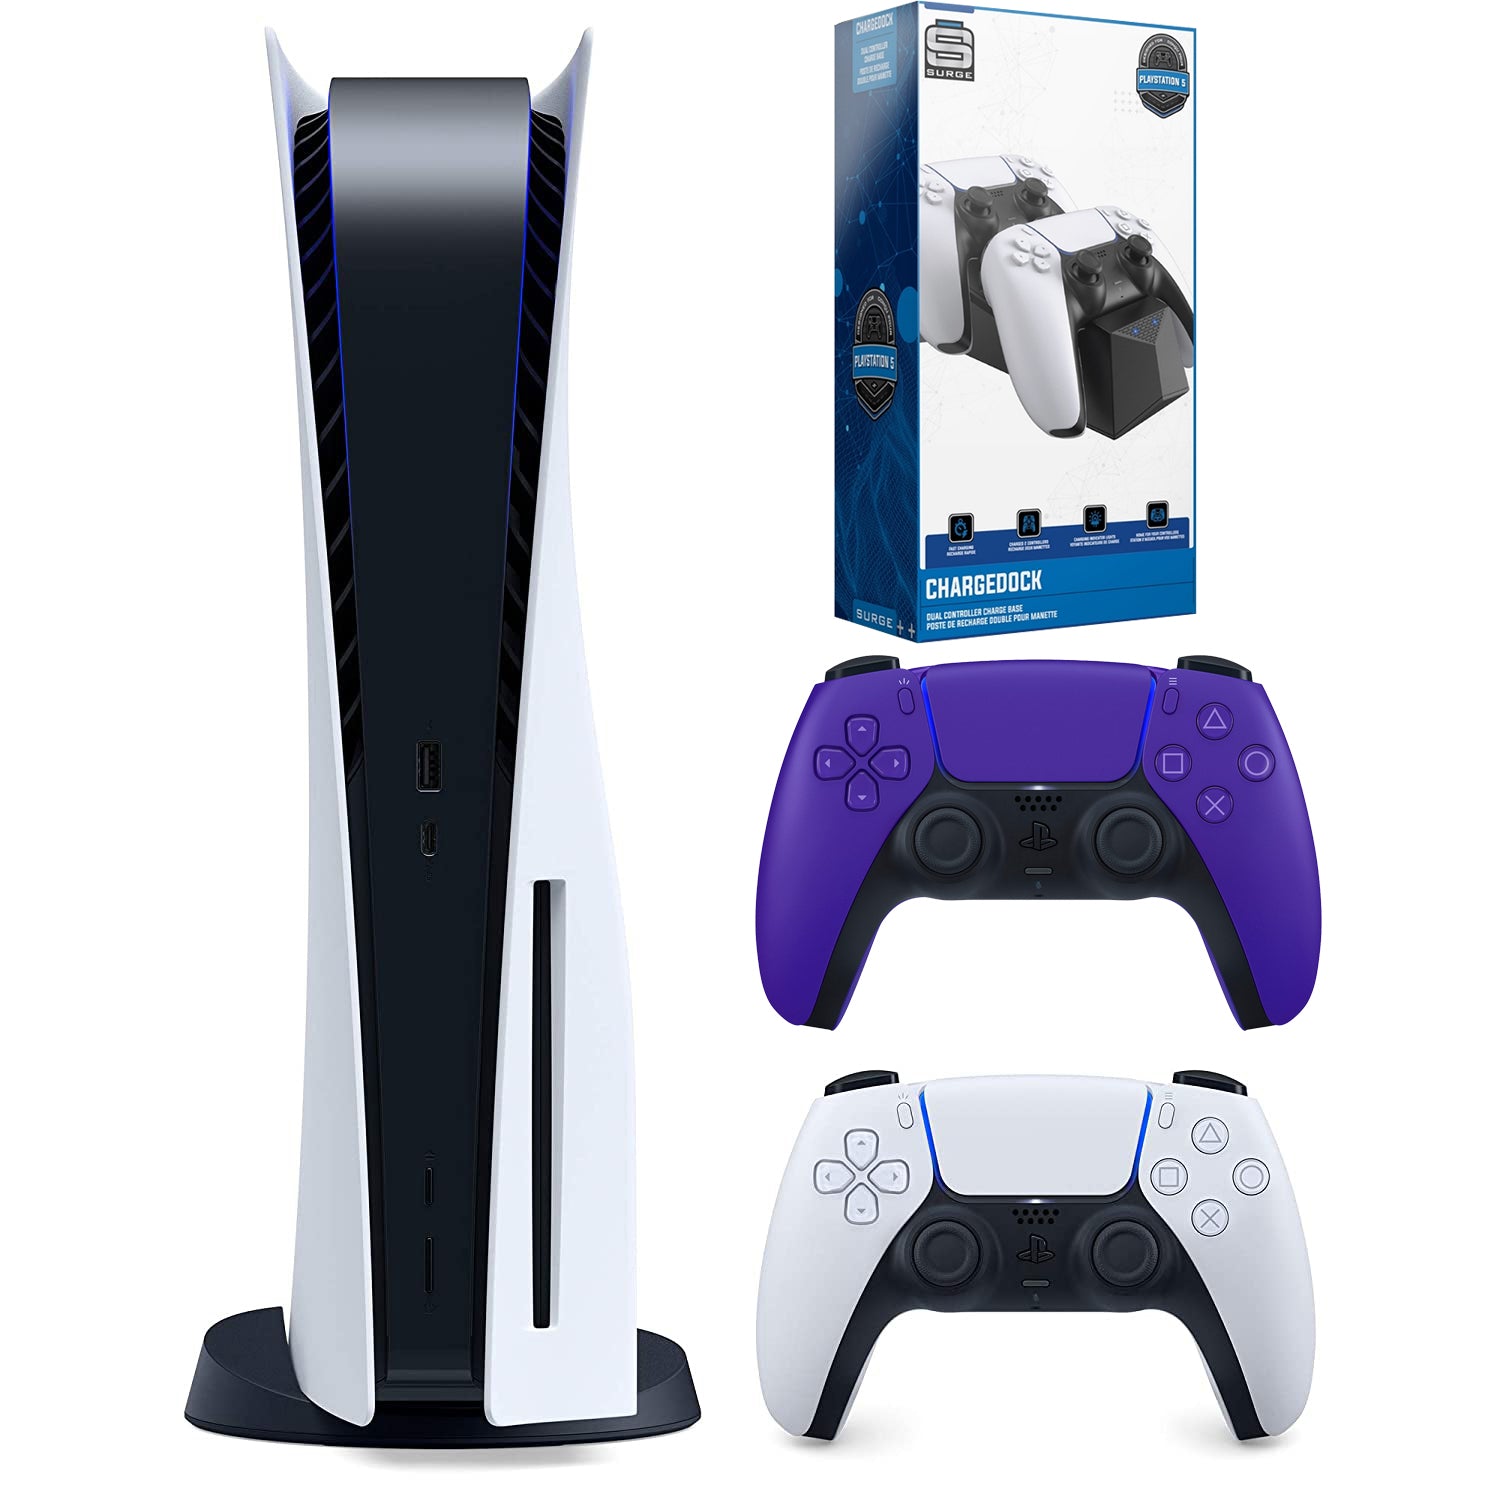 Sony Playstation 5 Disc Version (Sony PS5 Disc) with Extra Controller and Dual Charging Station - Galactic Purple Bundle - Pro-Distributing